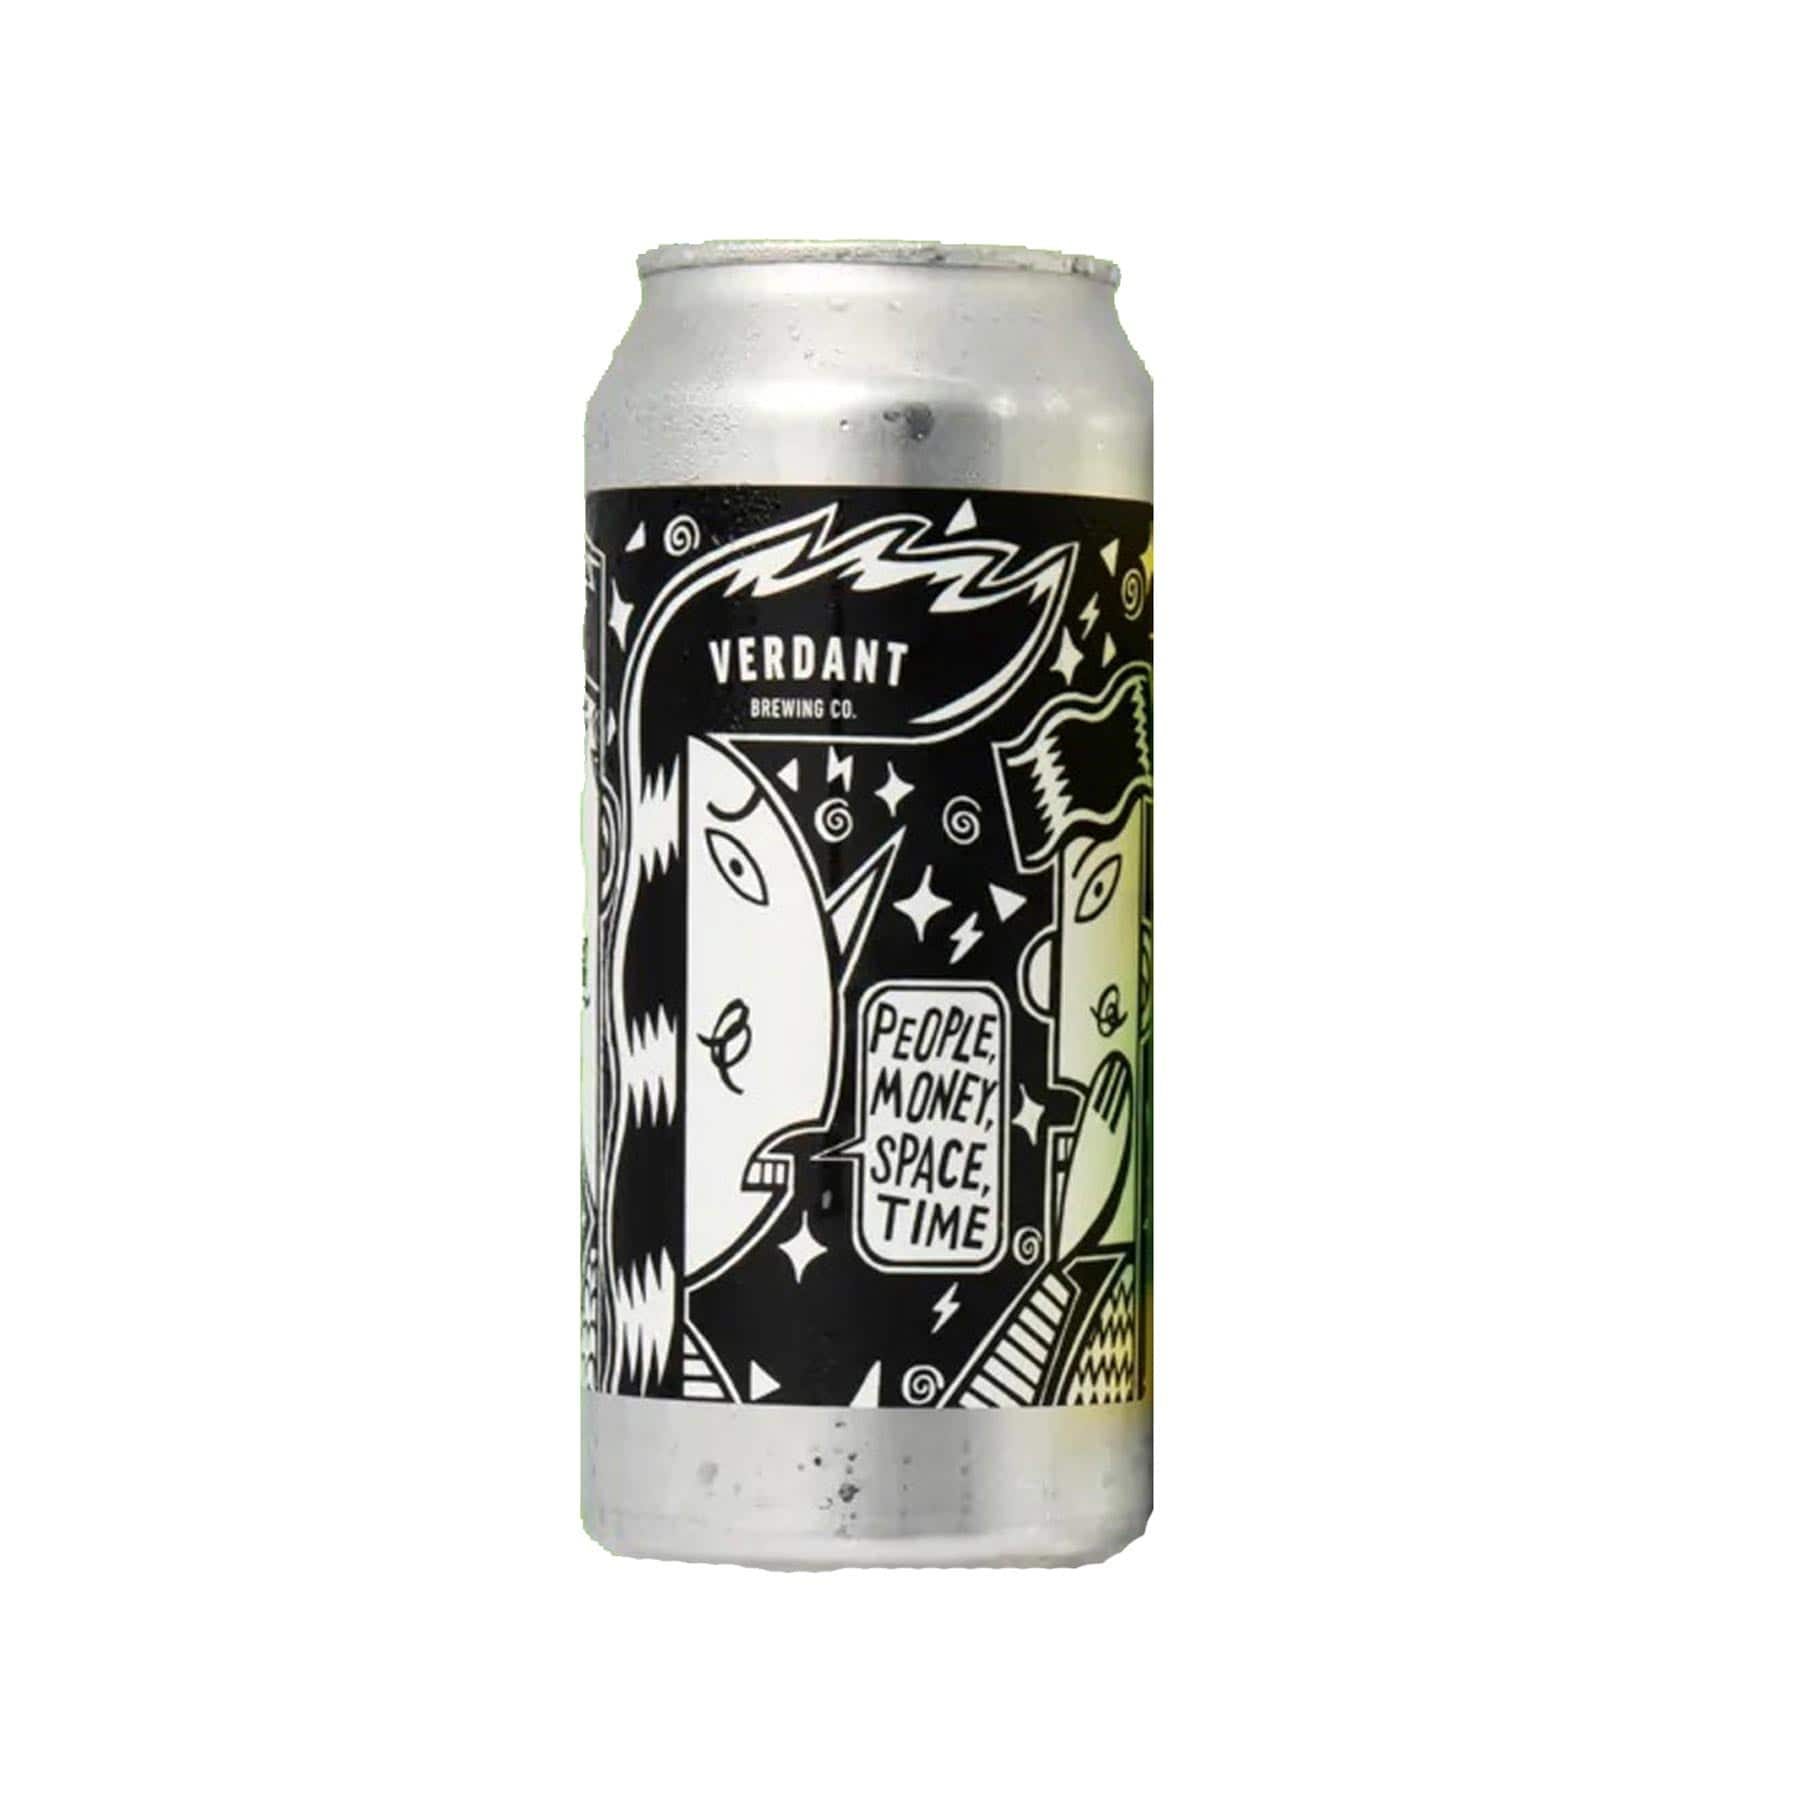 People money space time pale ale 440ml